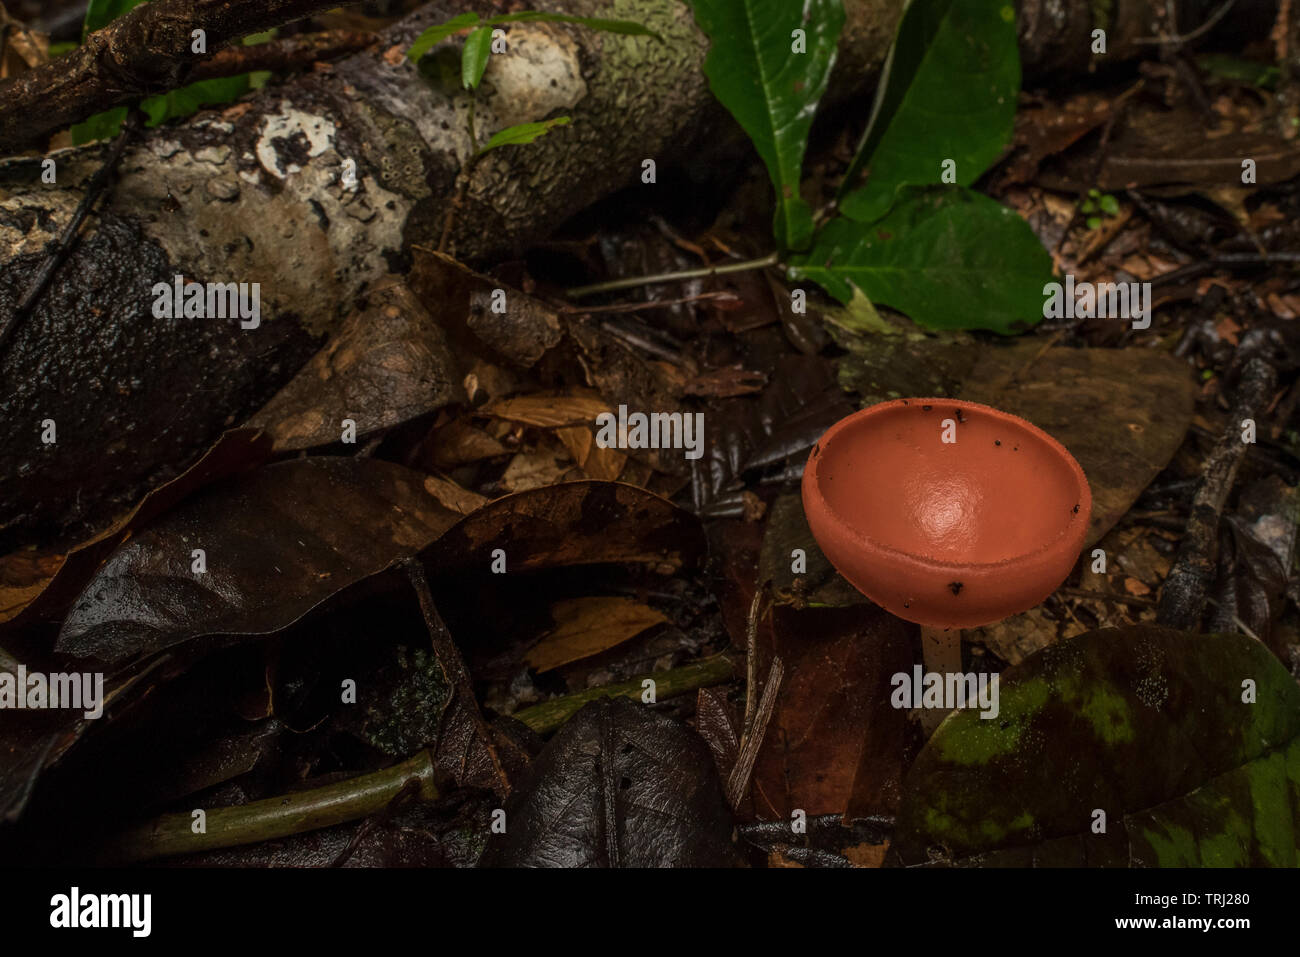 A cup fungus grows from the forest floor in Yasuni National park in Amazonian Ecuador. Stock Photo